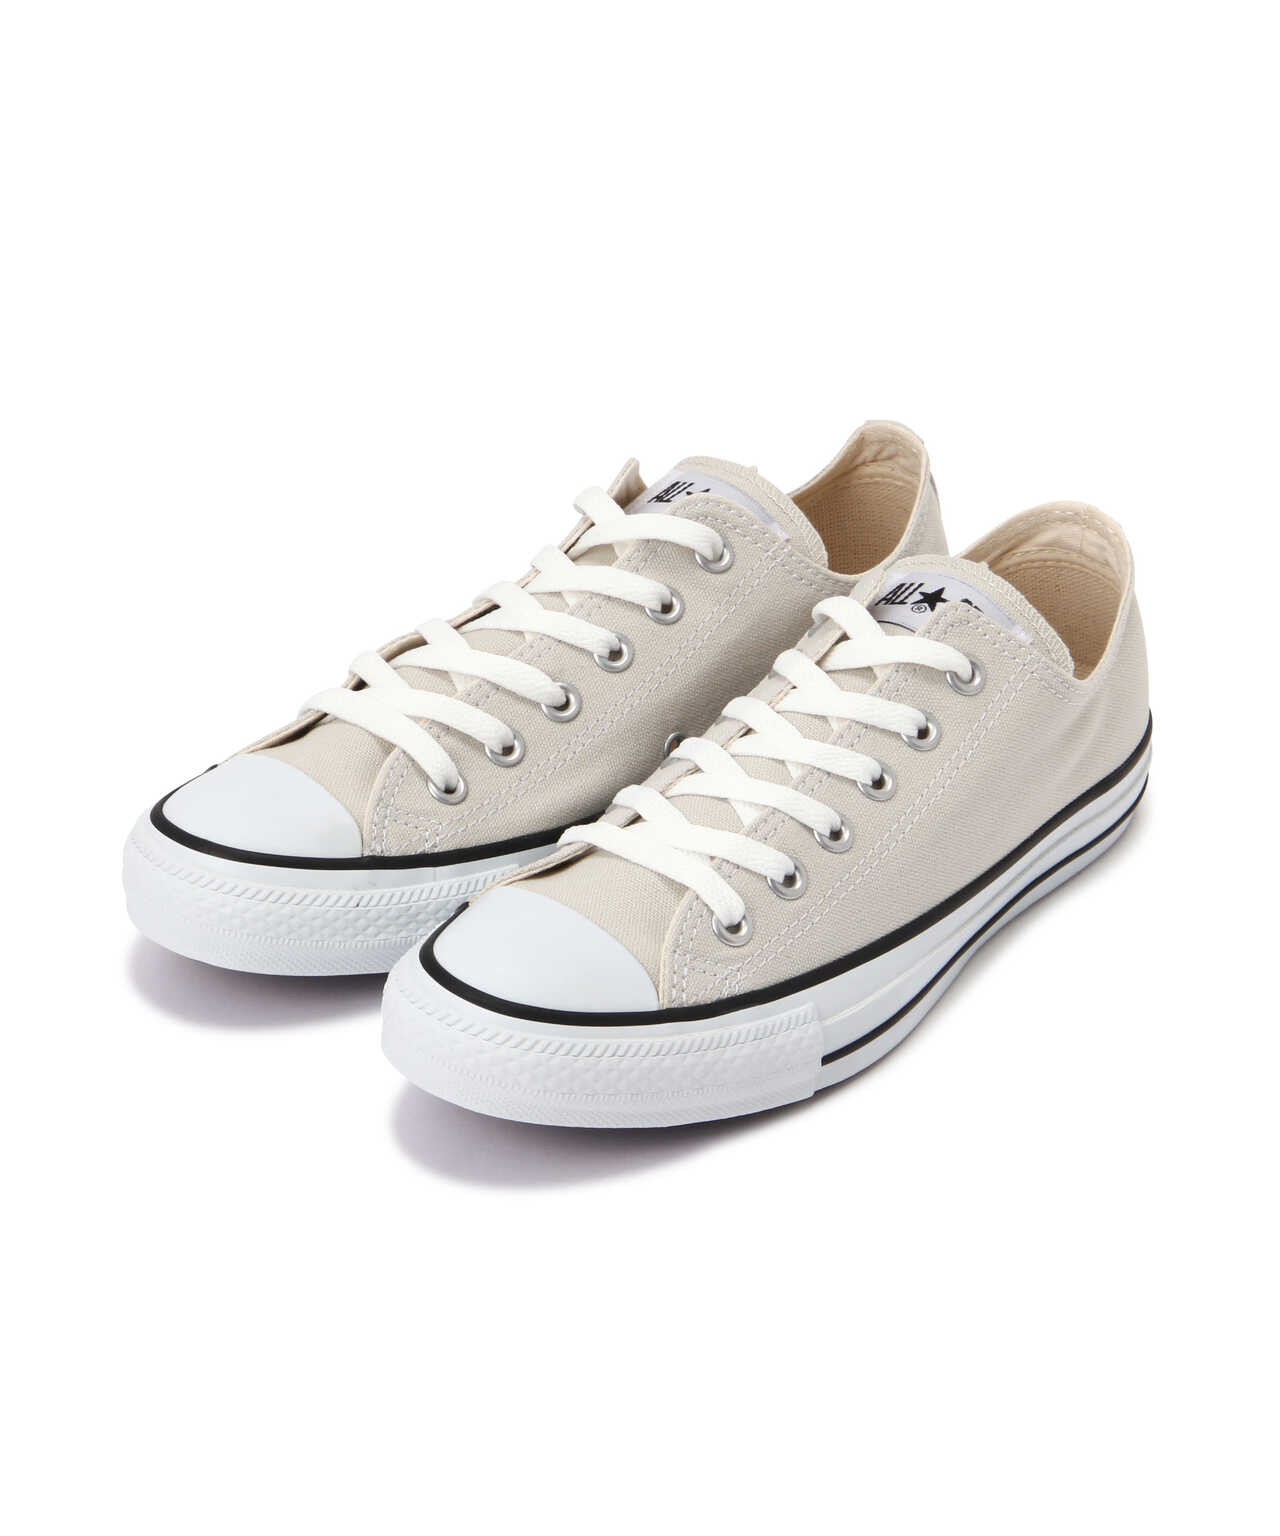 【CONVERSE】CANVAS ALL STAR COLOR スニーカー